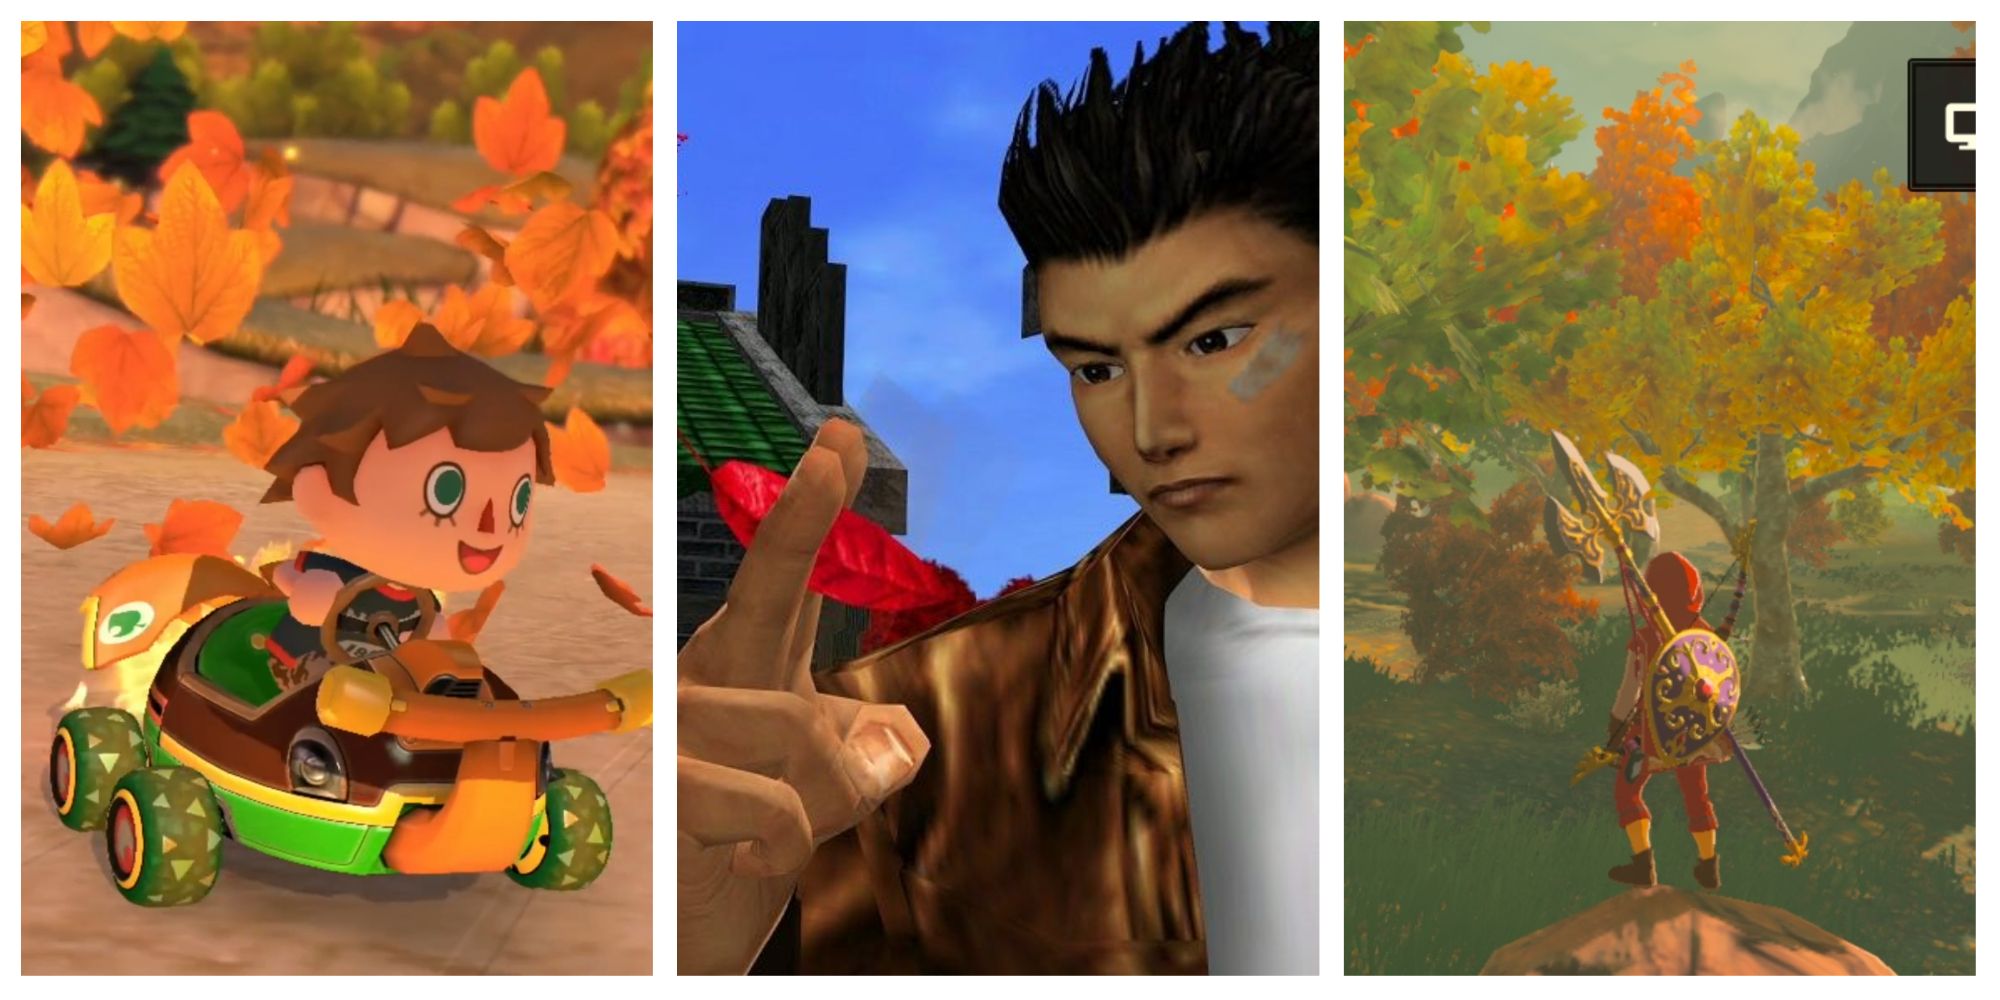 Left: An Animal Crossing villager driving through some leaves in Mario Kart 8. Center: Ryo holding a red leaf between his middle and pointer finger in Shenmue 2. Right: Link (from behind) looking at fall foliage in The Legend of Zelda: Breath of the Wild. Image sources: Game Rant and Terrence Smith.